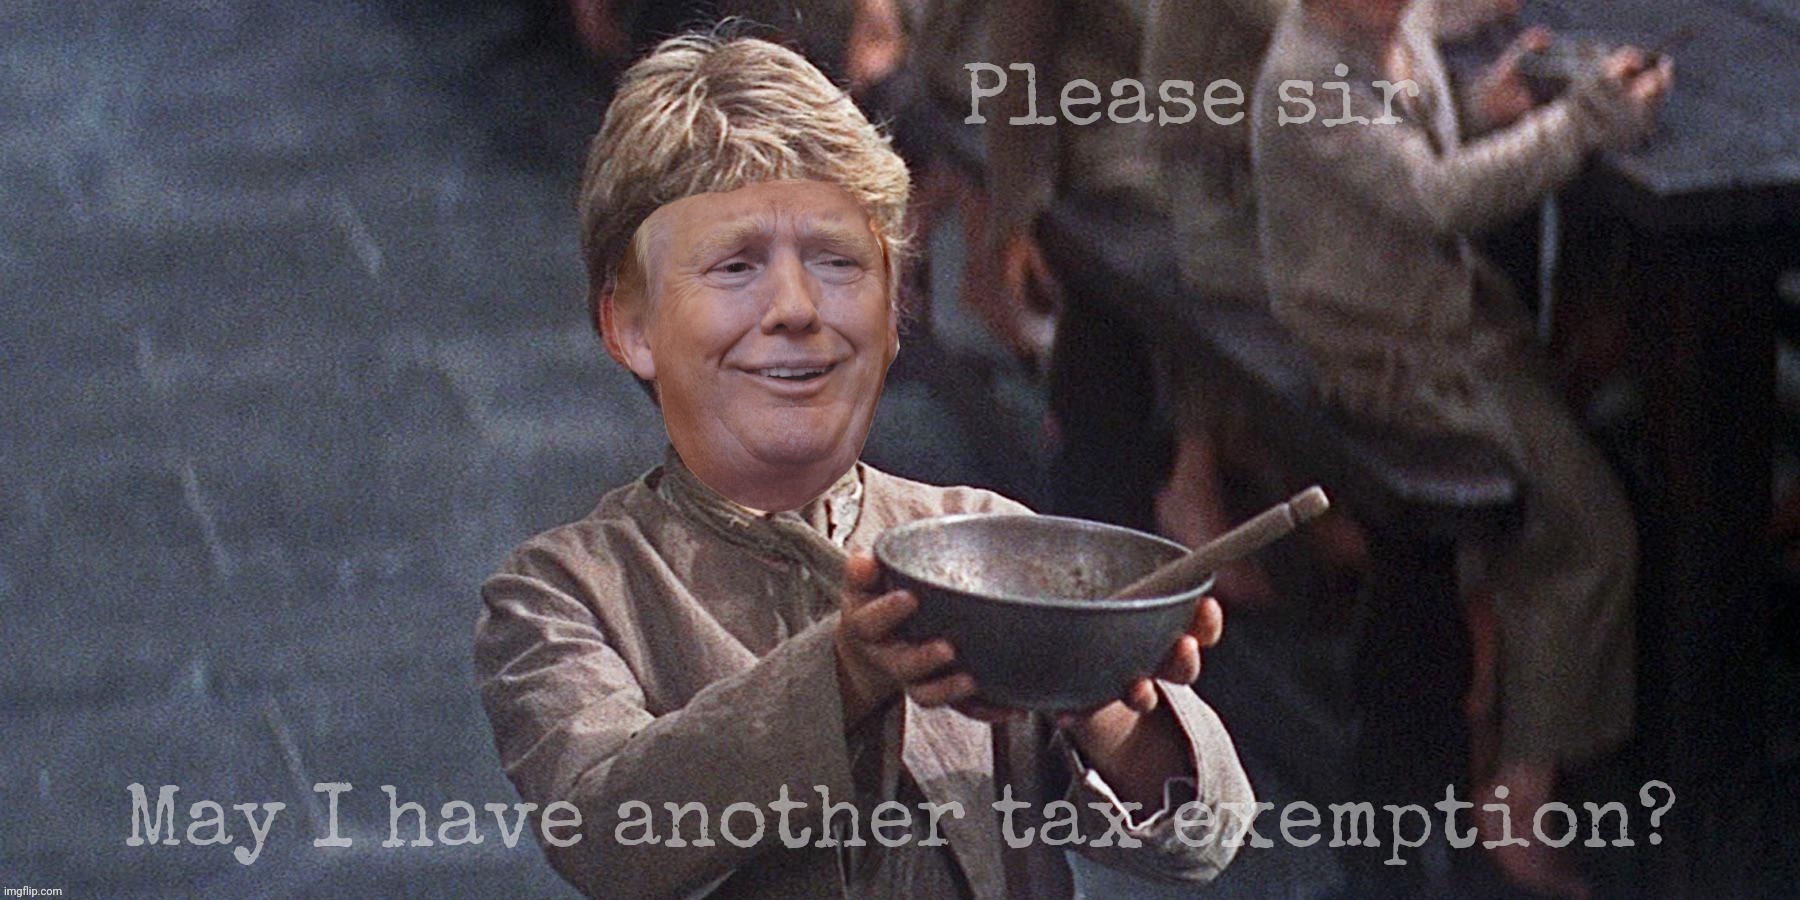 Please help the needy, self-proclaimed billionaires can be poverty stricken too,,, | Please sir May I have another tax exemption? | image tagged in oliver,oliver twist,oliver twist please sir,donald trump,trump,tax exemptions for the rich | made w/ Imgflip meme maker